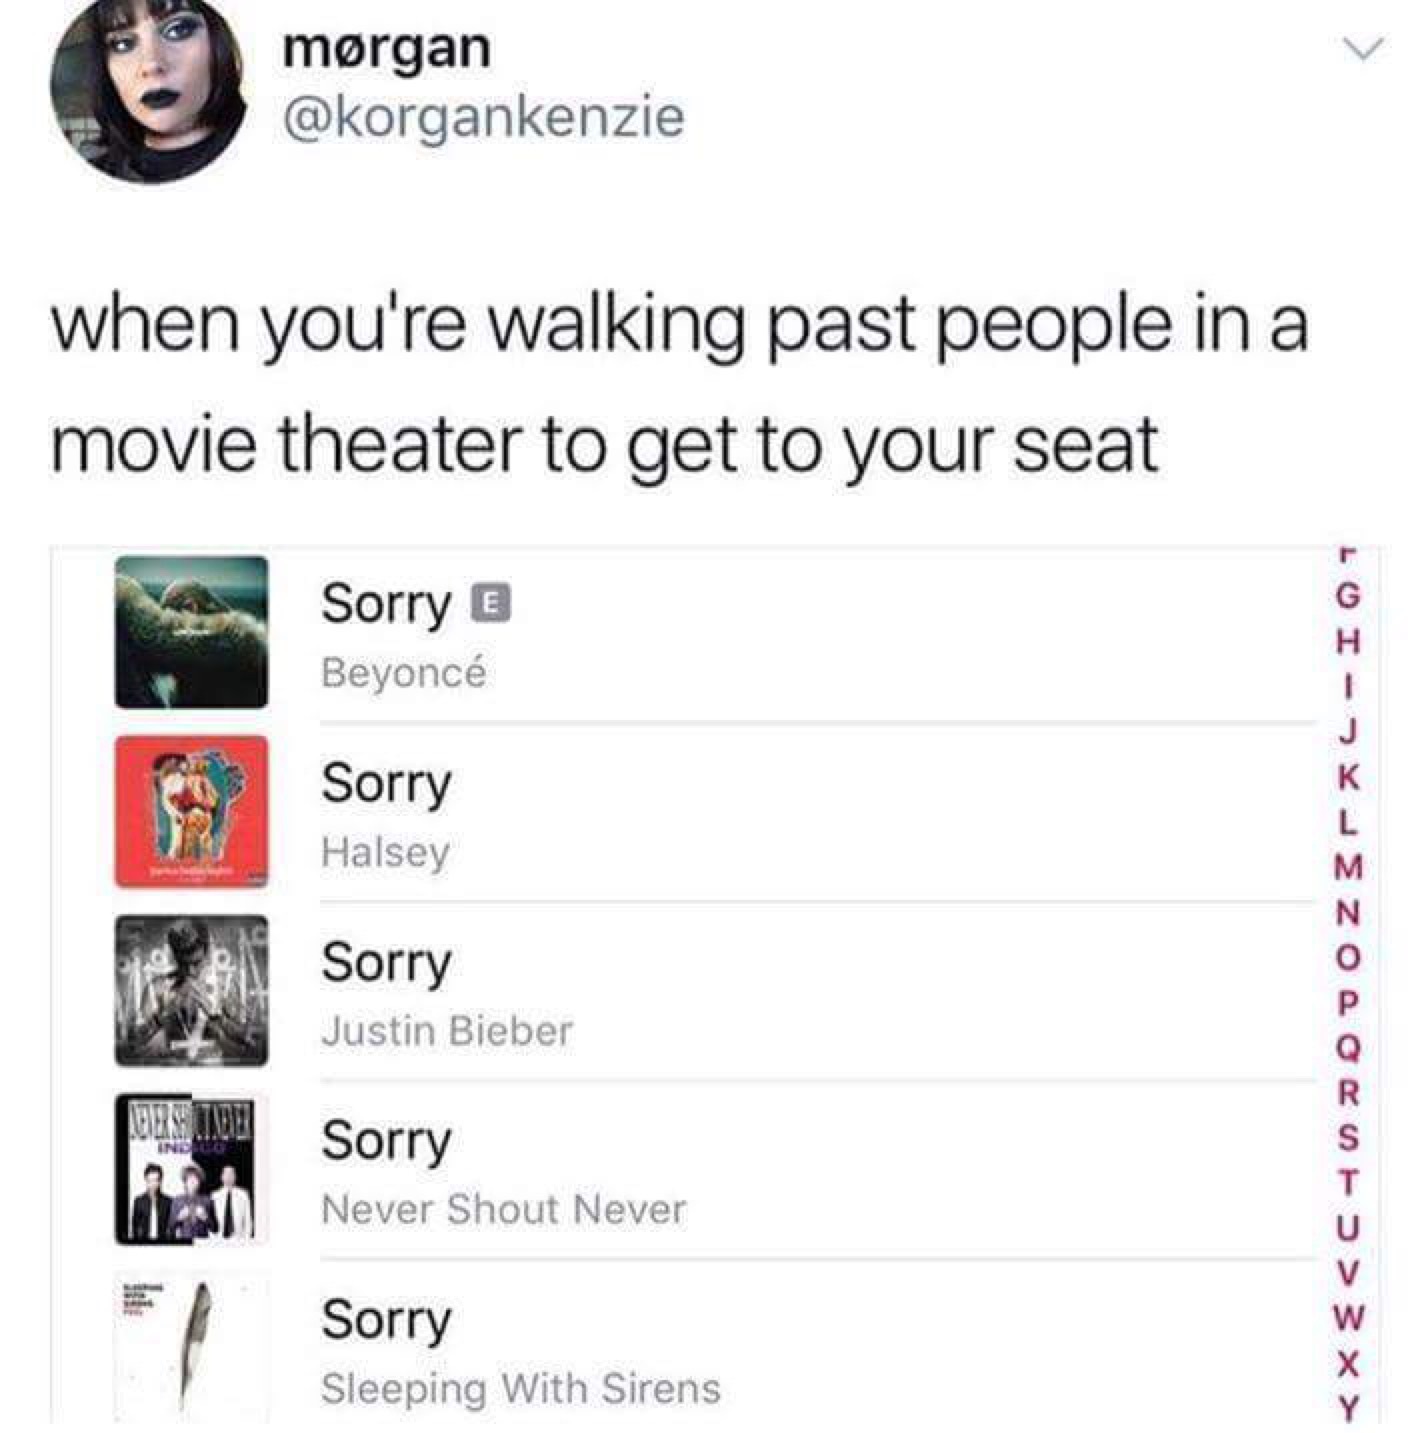 List of songs called Sorry with joke of how it is when you are walking past people in a movie theatre to get to you seat